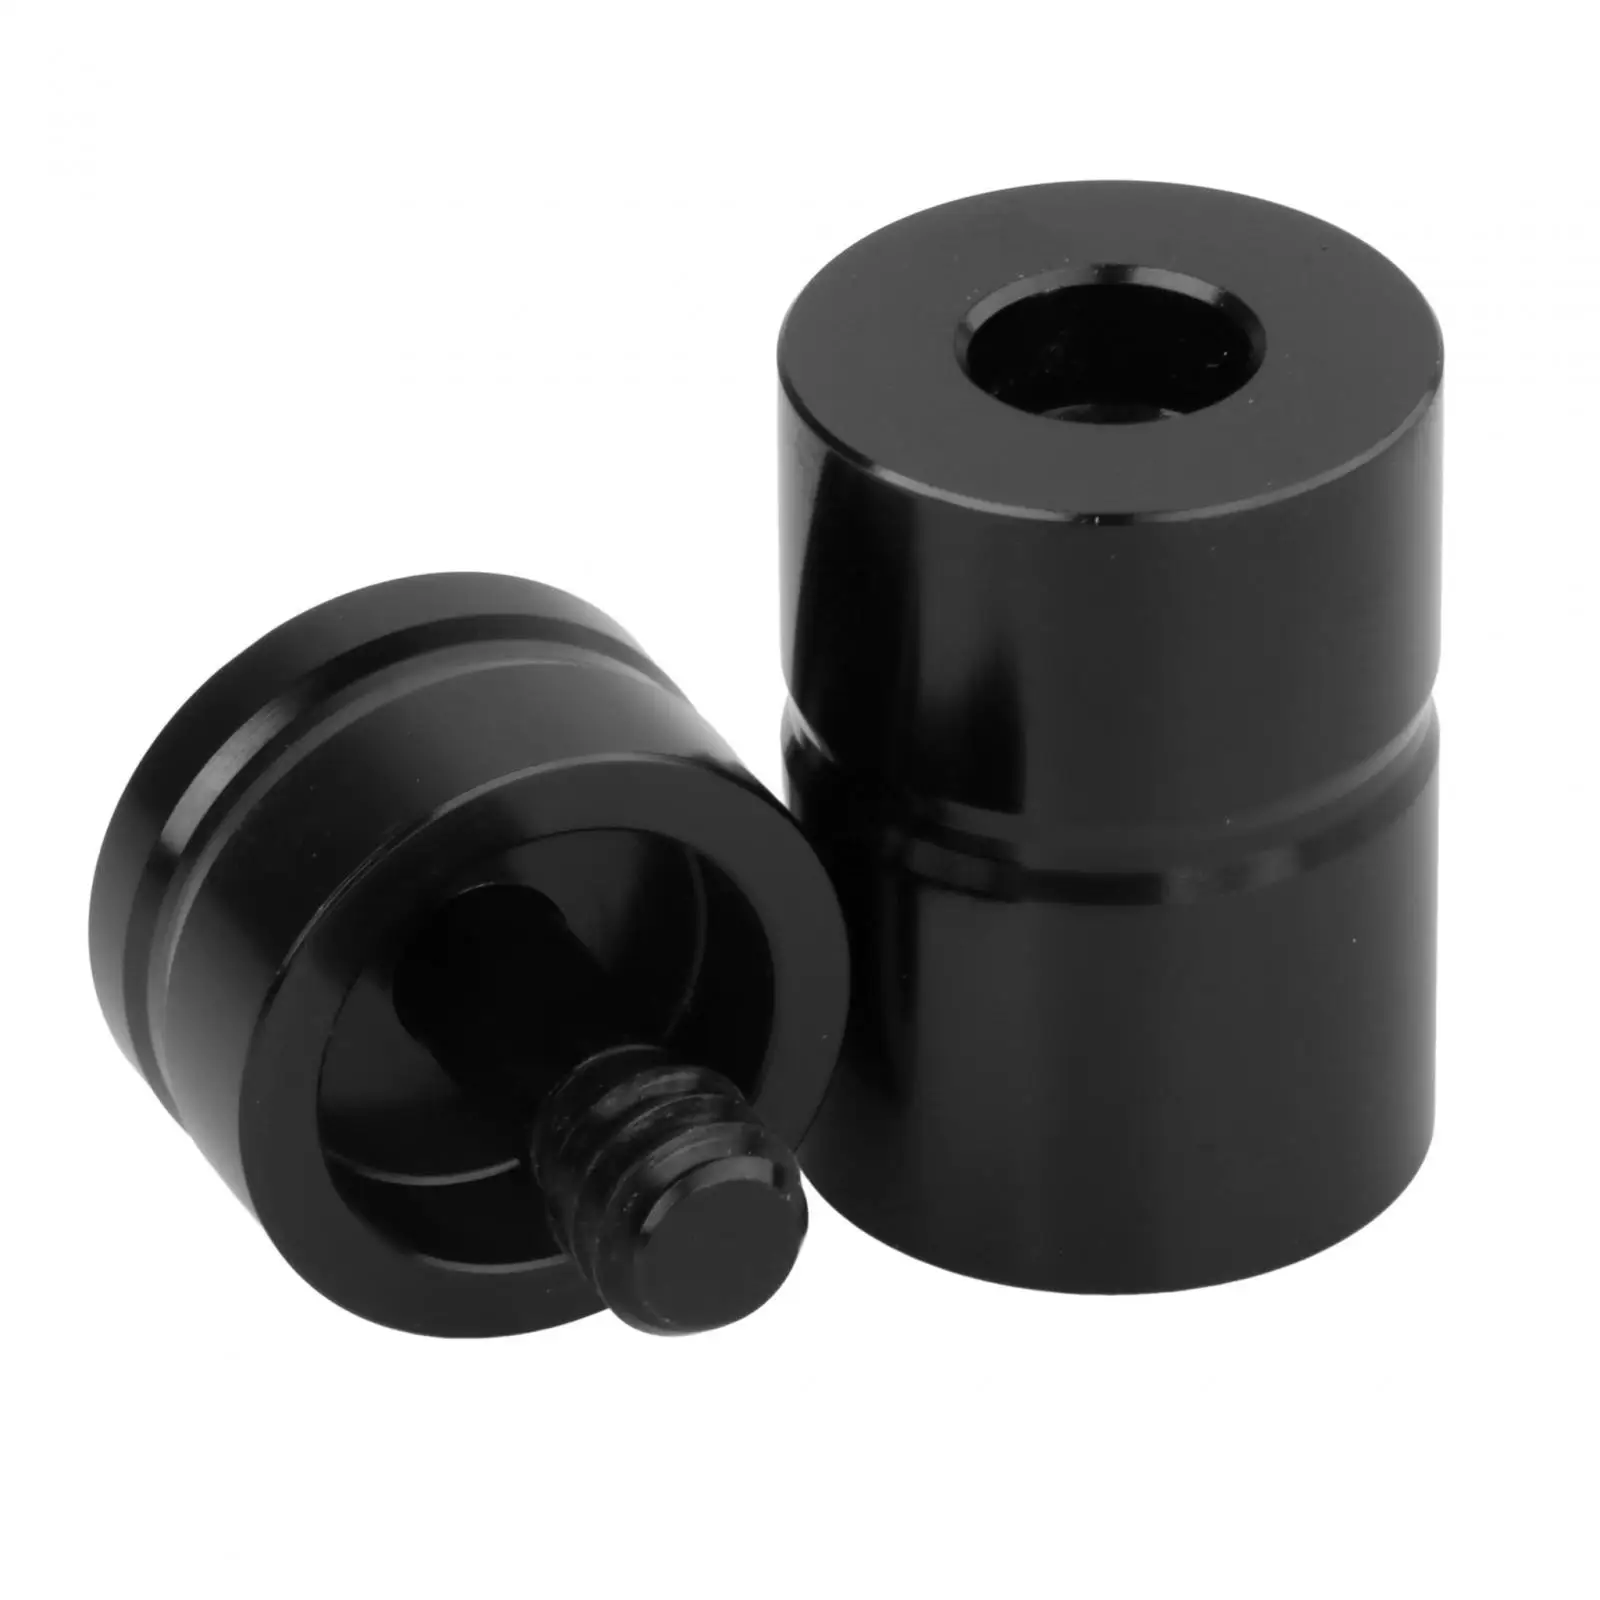 Joint Protector for Pool Cue Joint Thread Protectors Caps Sports Accessories